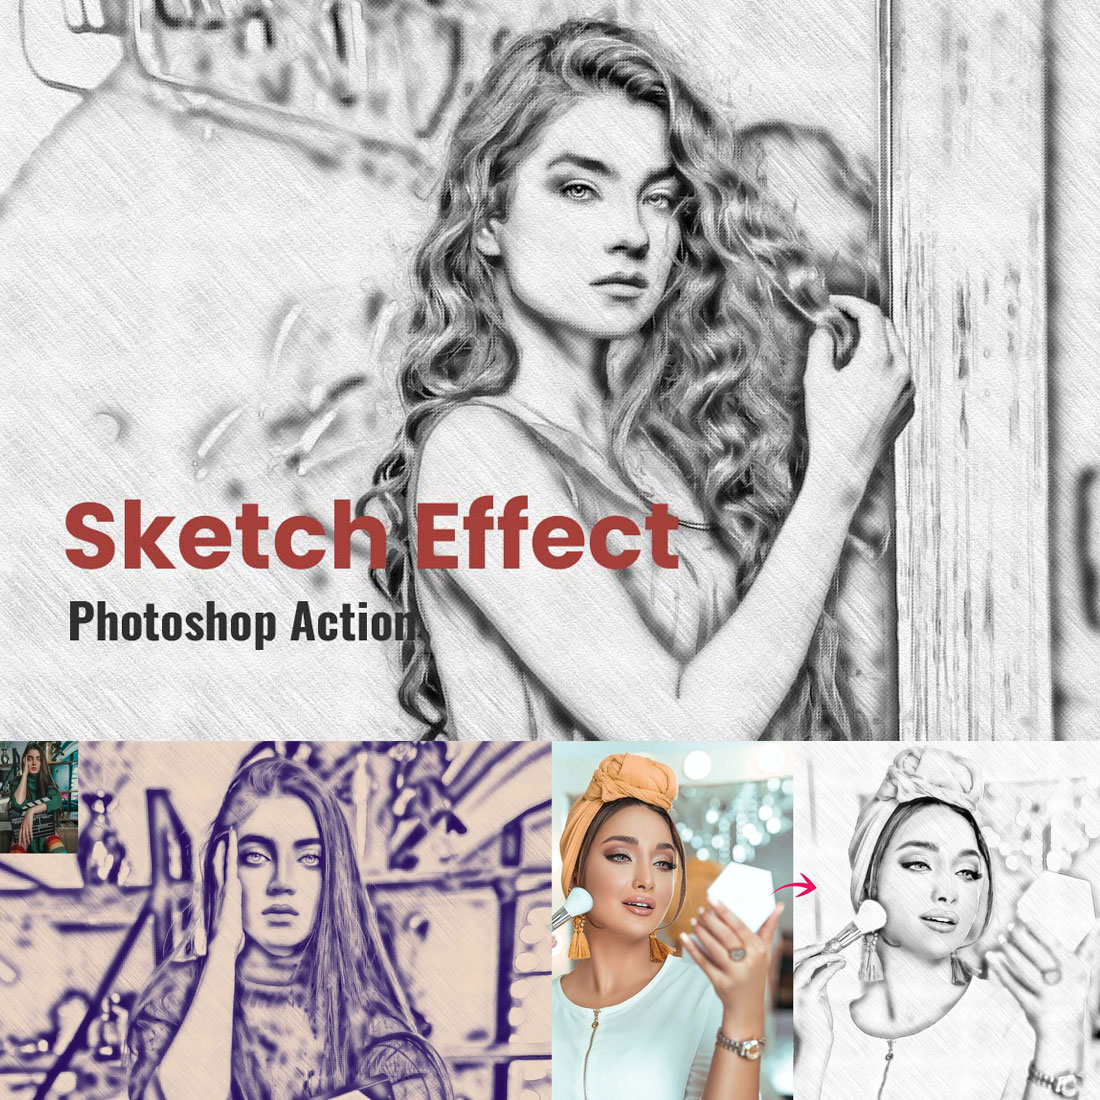 Oil Sketch Photoshop Action by AL AMIN on Dribbble